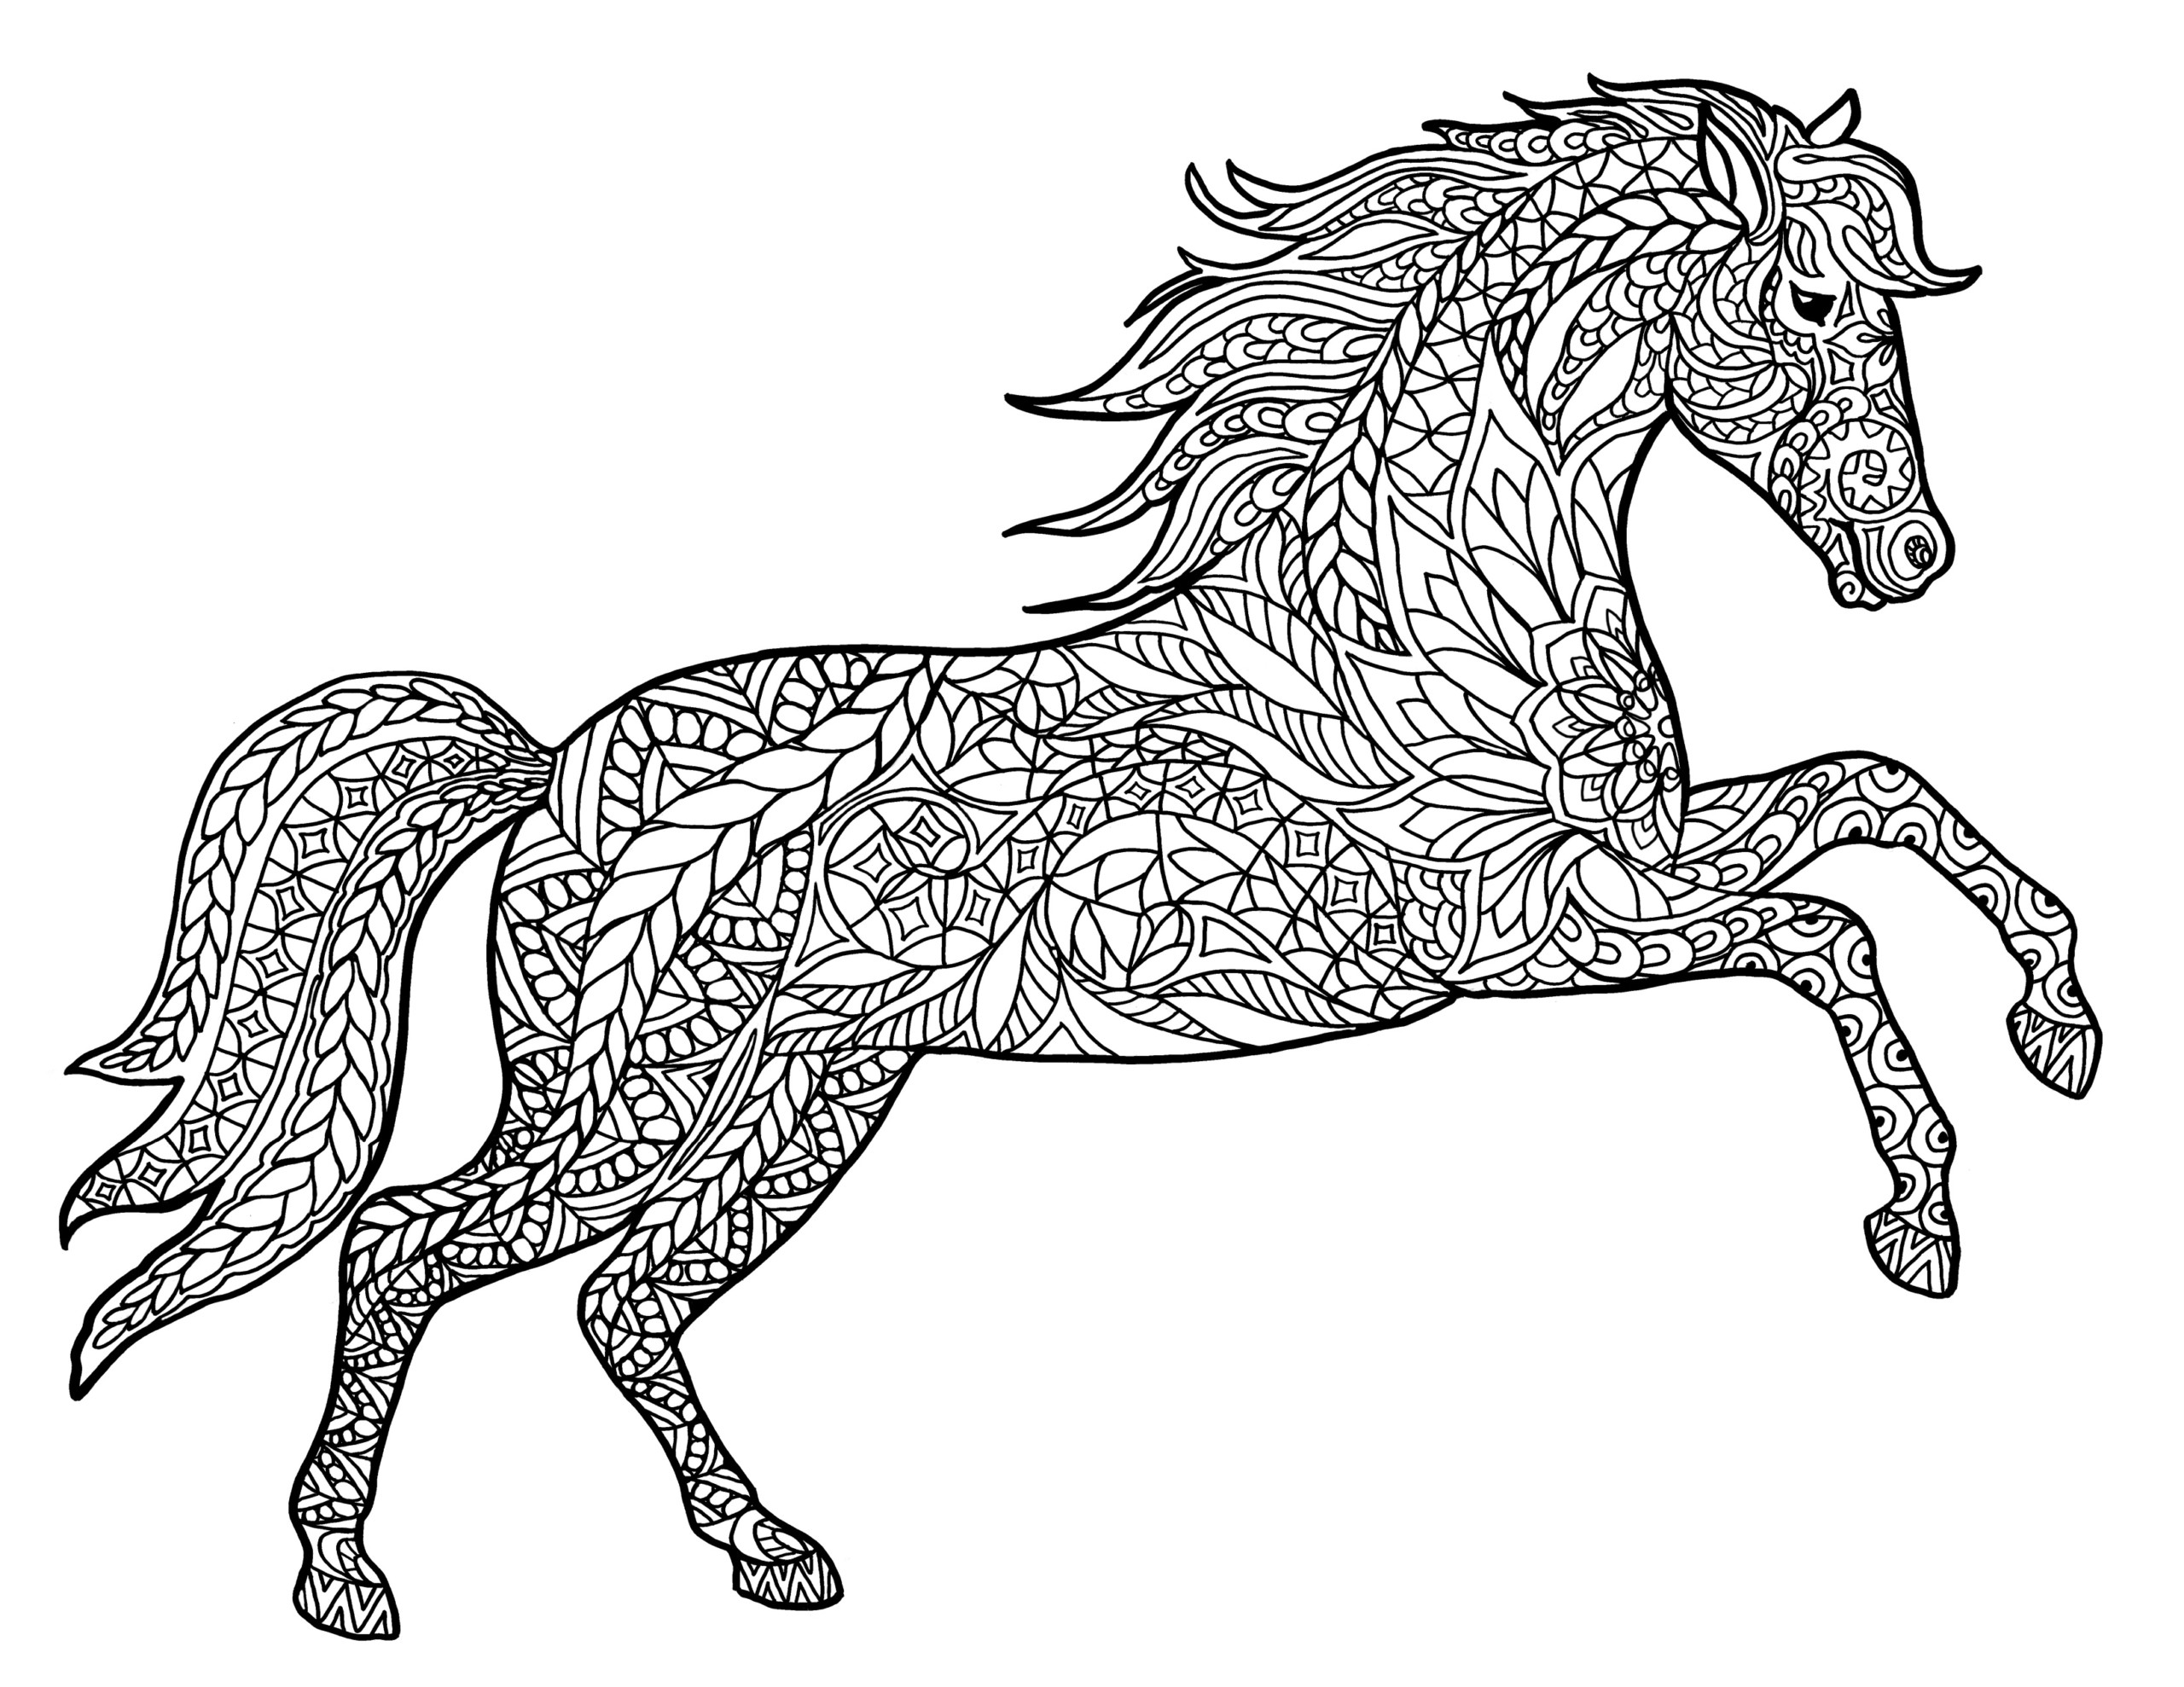 Animal Coloring Pages For Adults Best Coloring Pages For 